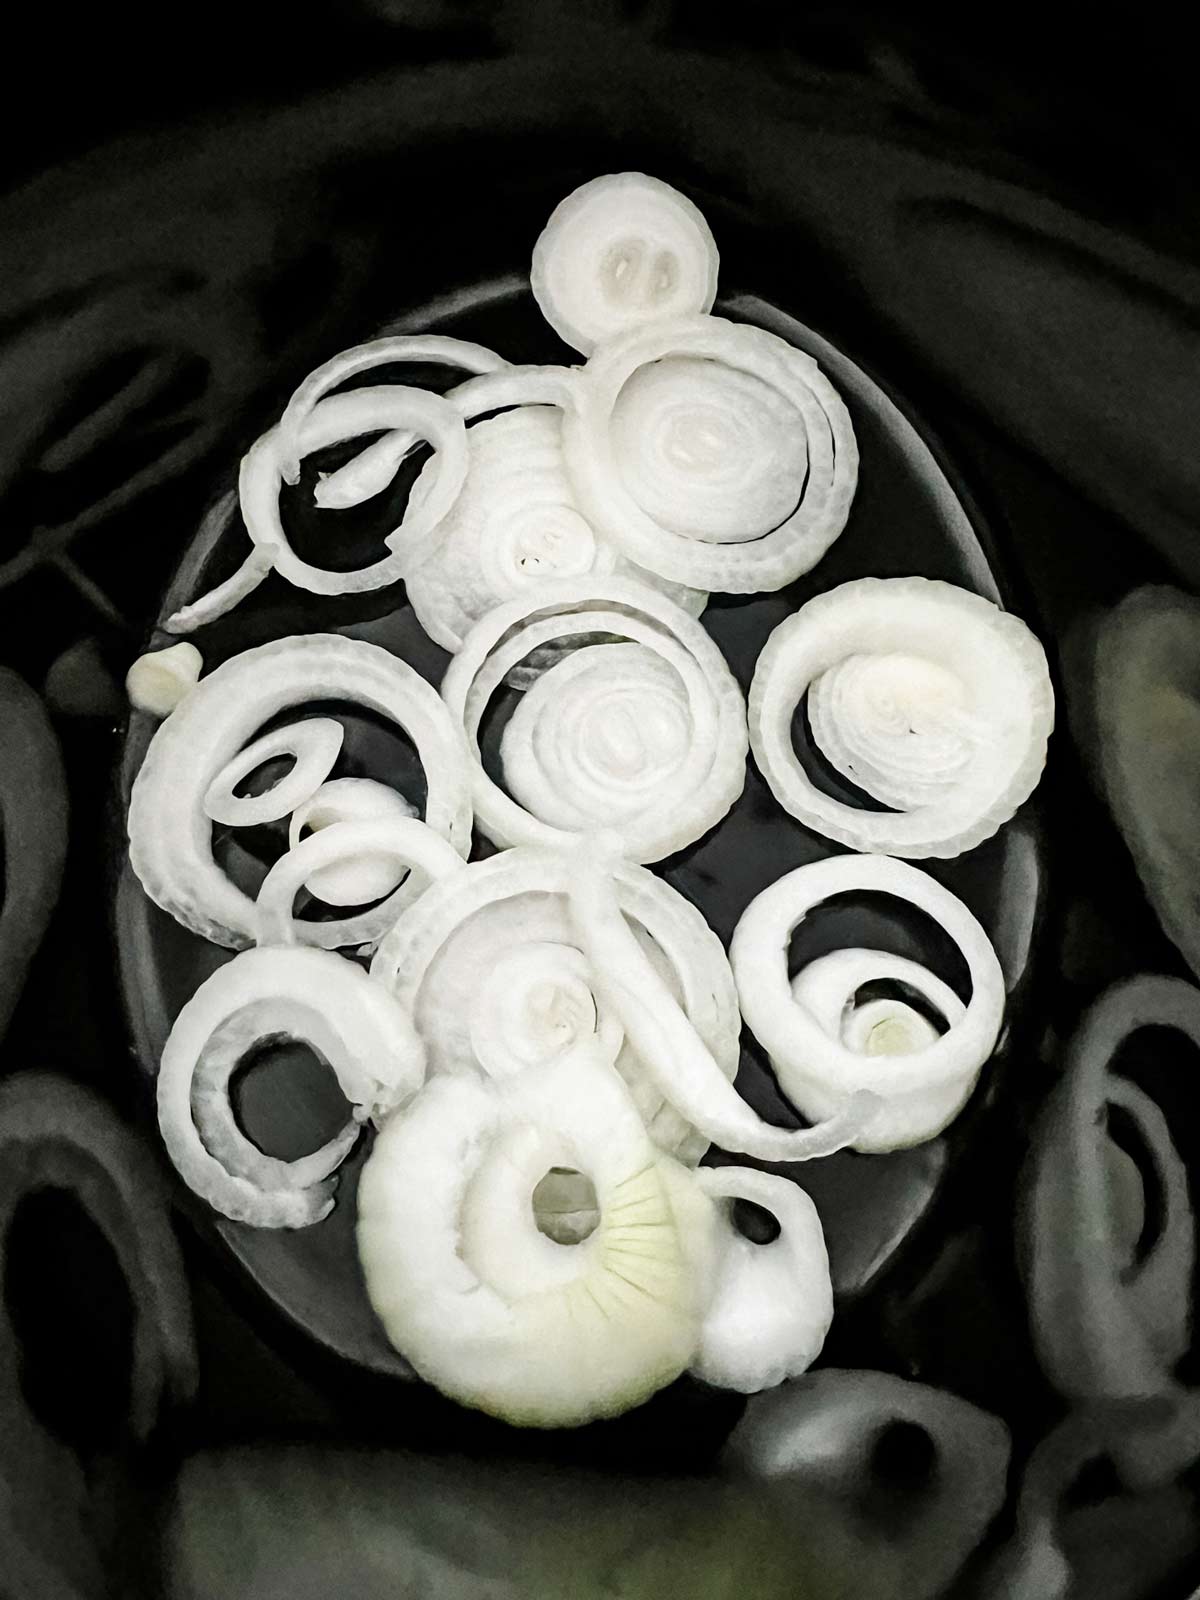 Onions in the bottom of a slow cooker.